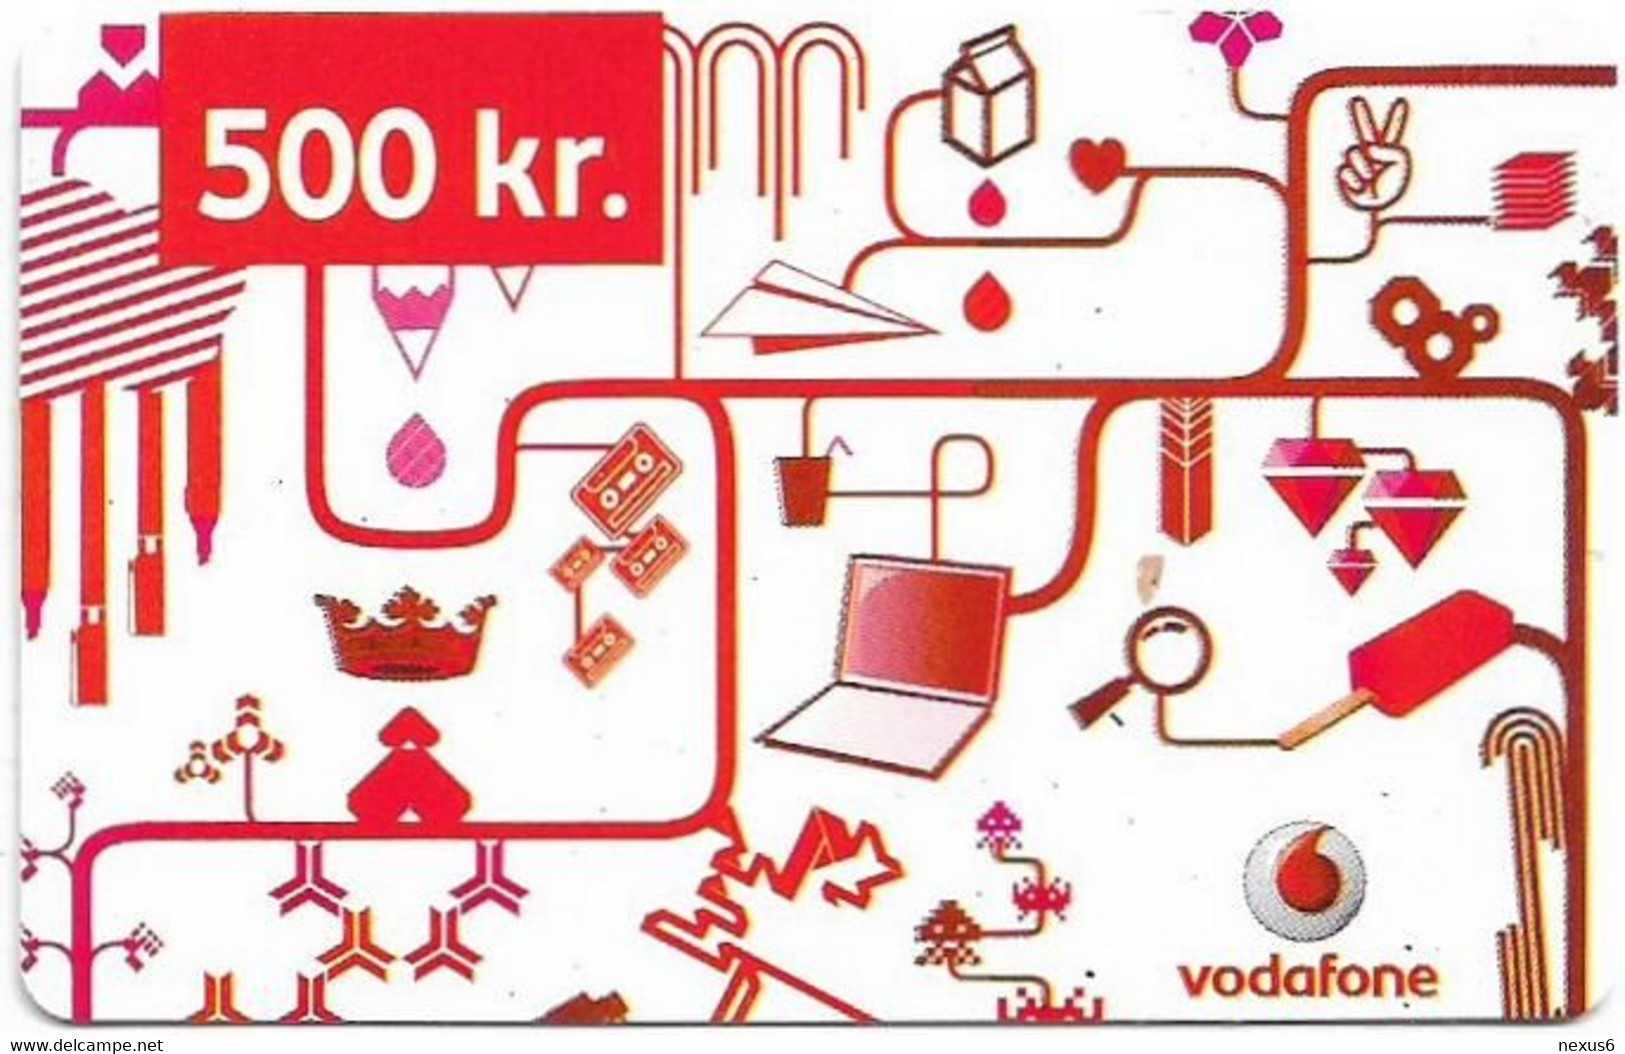 Iceland - Vodafone - Various Objects (Red), Exp.03.06.2009, GSM Refill 500Kr, Used - Island